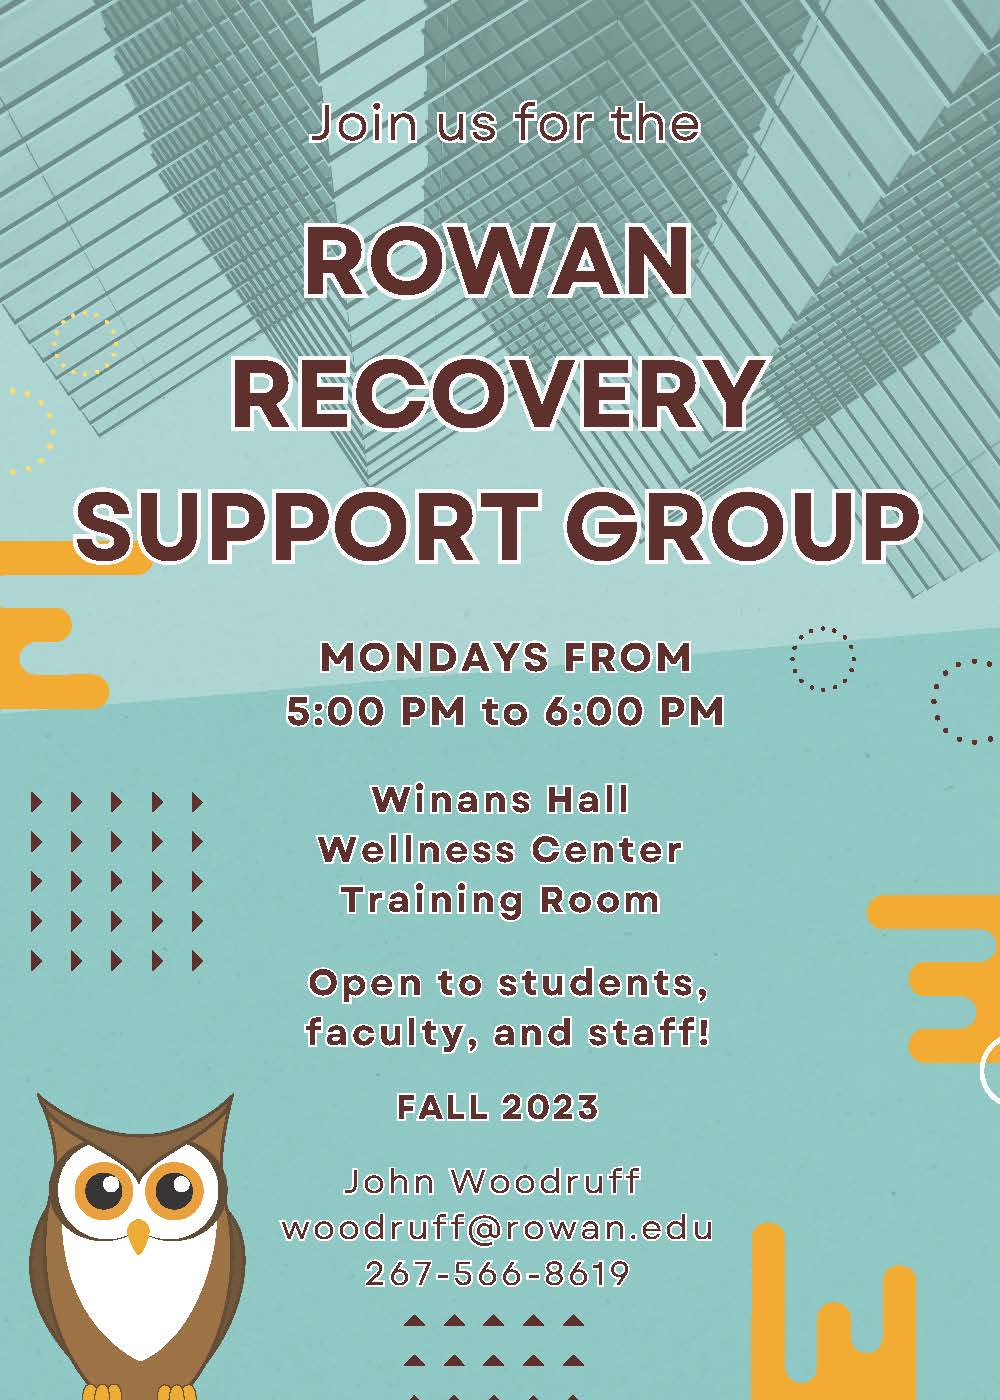 Rowan Recovery Support Group